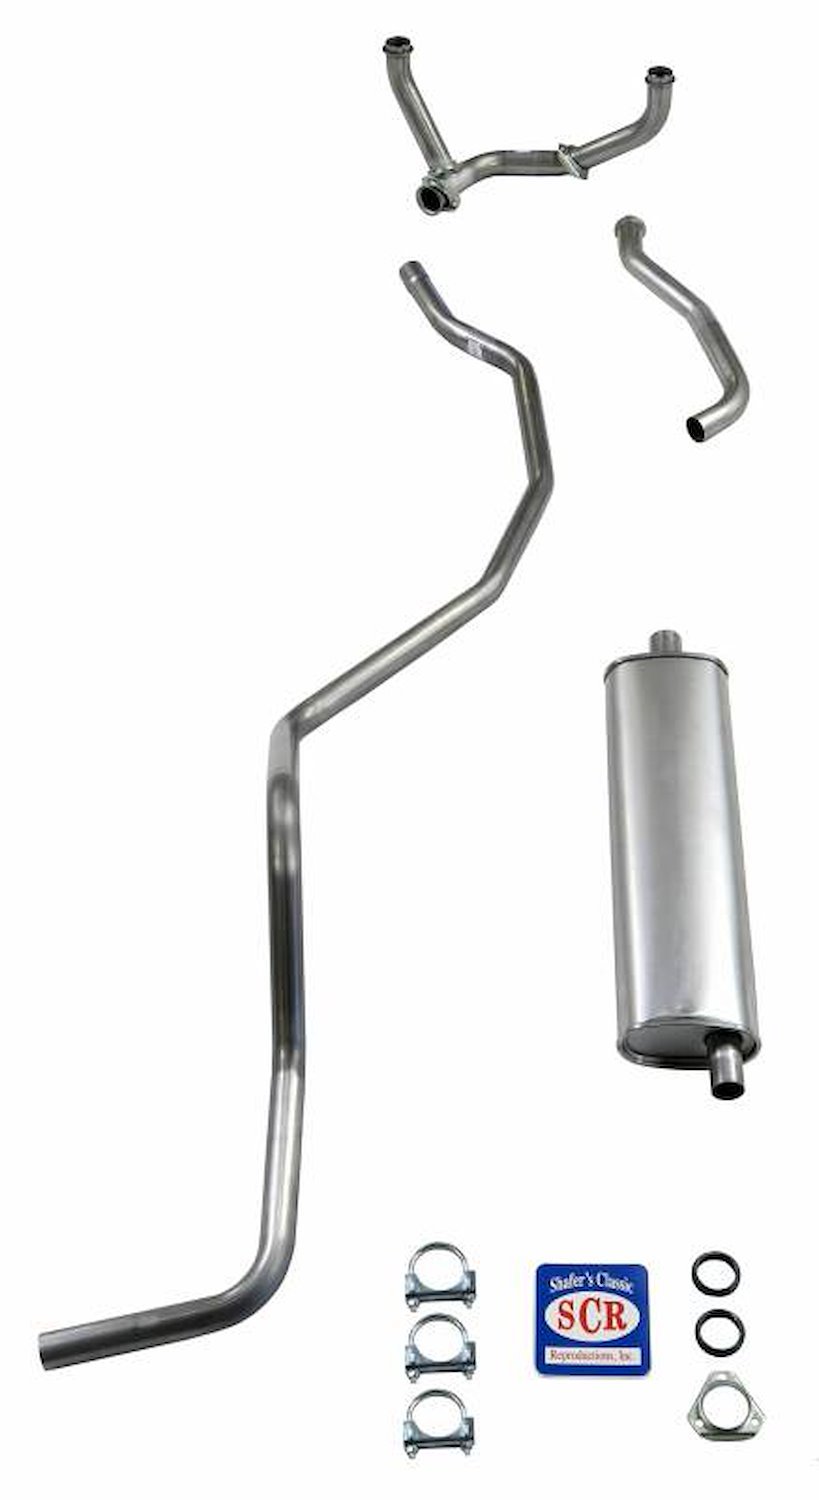 73039 1960-1964 Chevrolet SW 8-cyl 283 Single Exhaust & ONLY 1960 El Camino Exhaust System